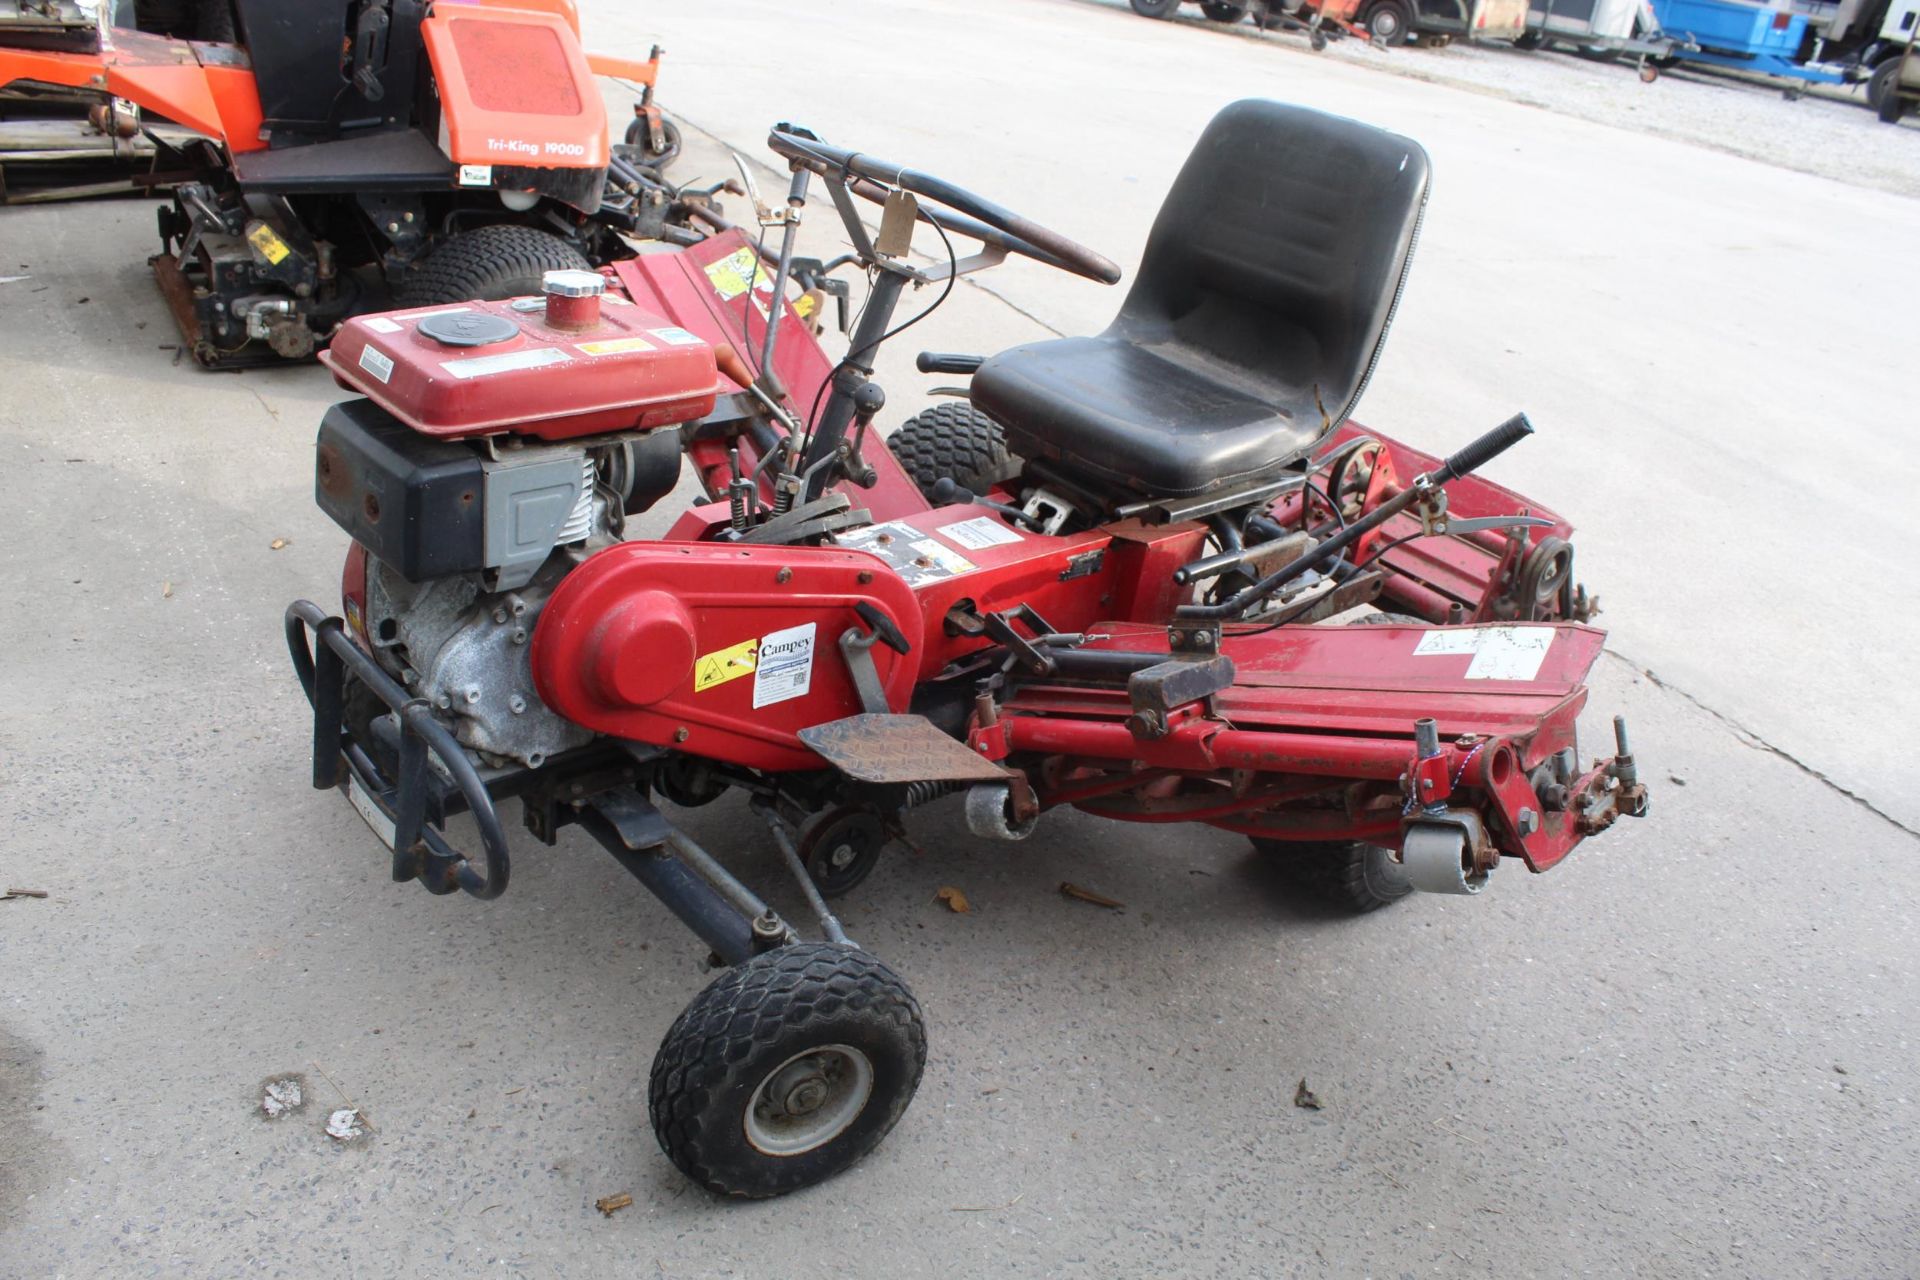 BARONES LM1800 RIDE ON GANG MOWER WITH SUBARU ENGINE + VAT - Image 2 of 3